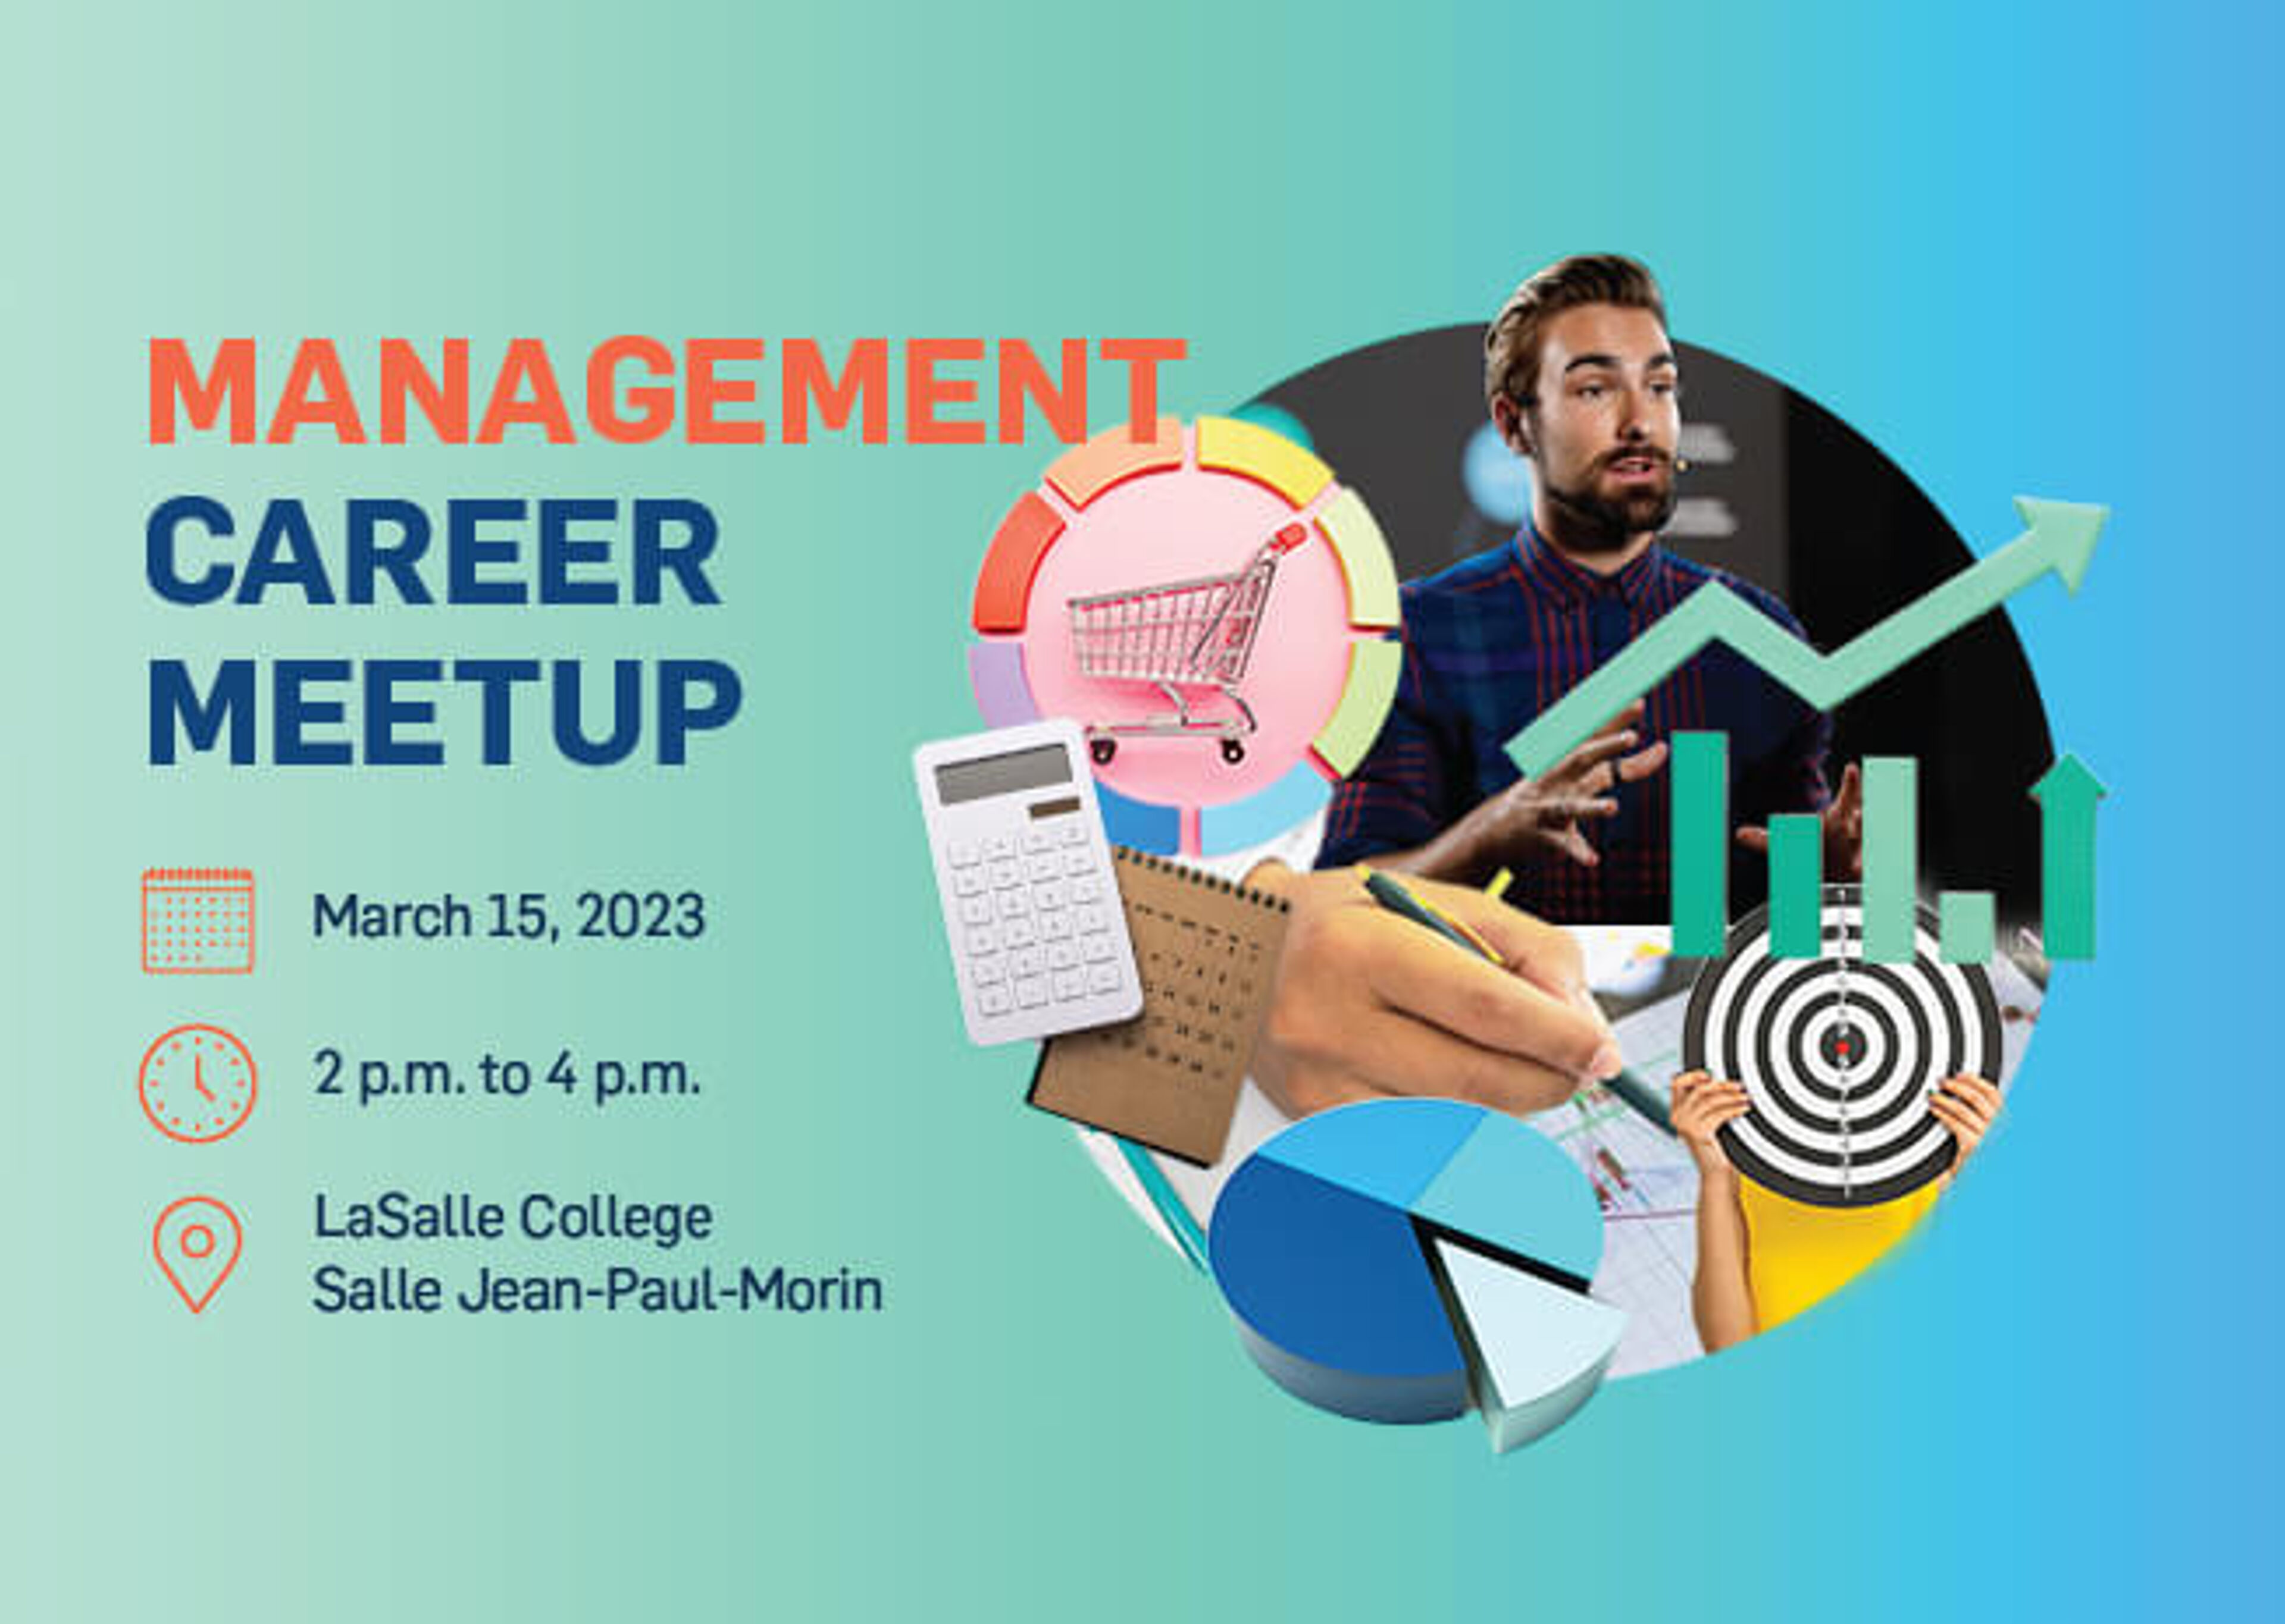 Advertisement for a Management Career Meetup on March 15, 2023, with graphics depicting business elements, at LaSalle College.